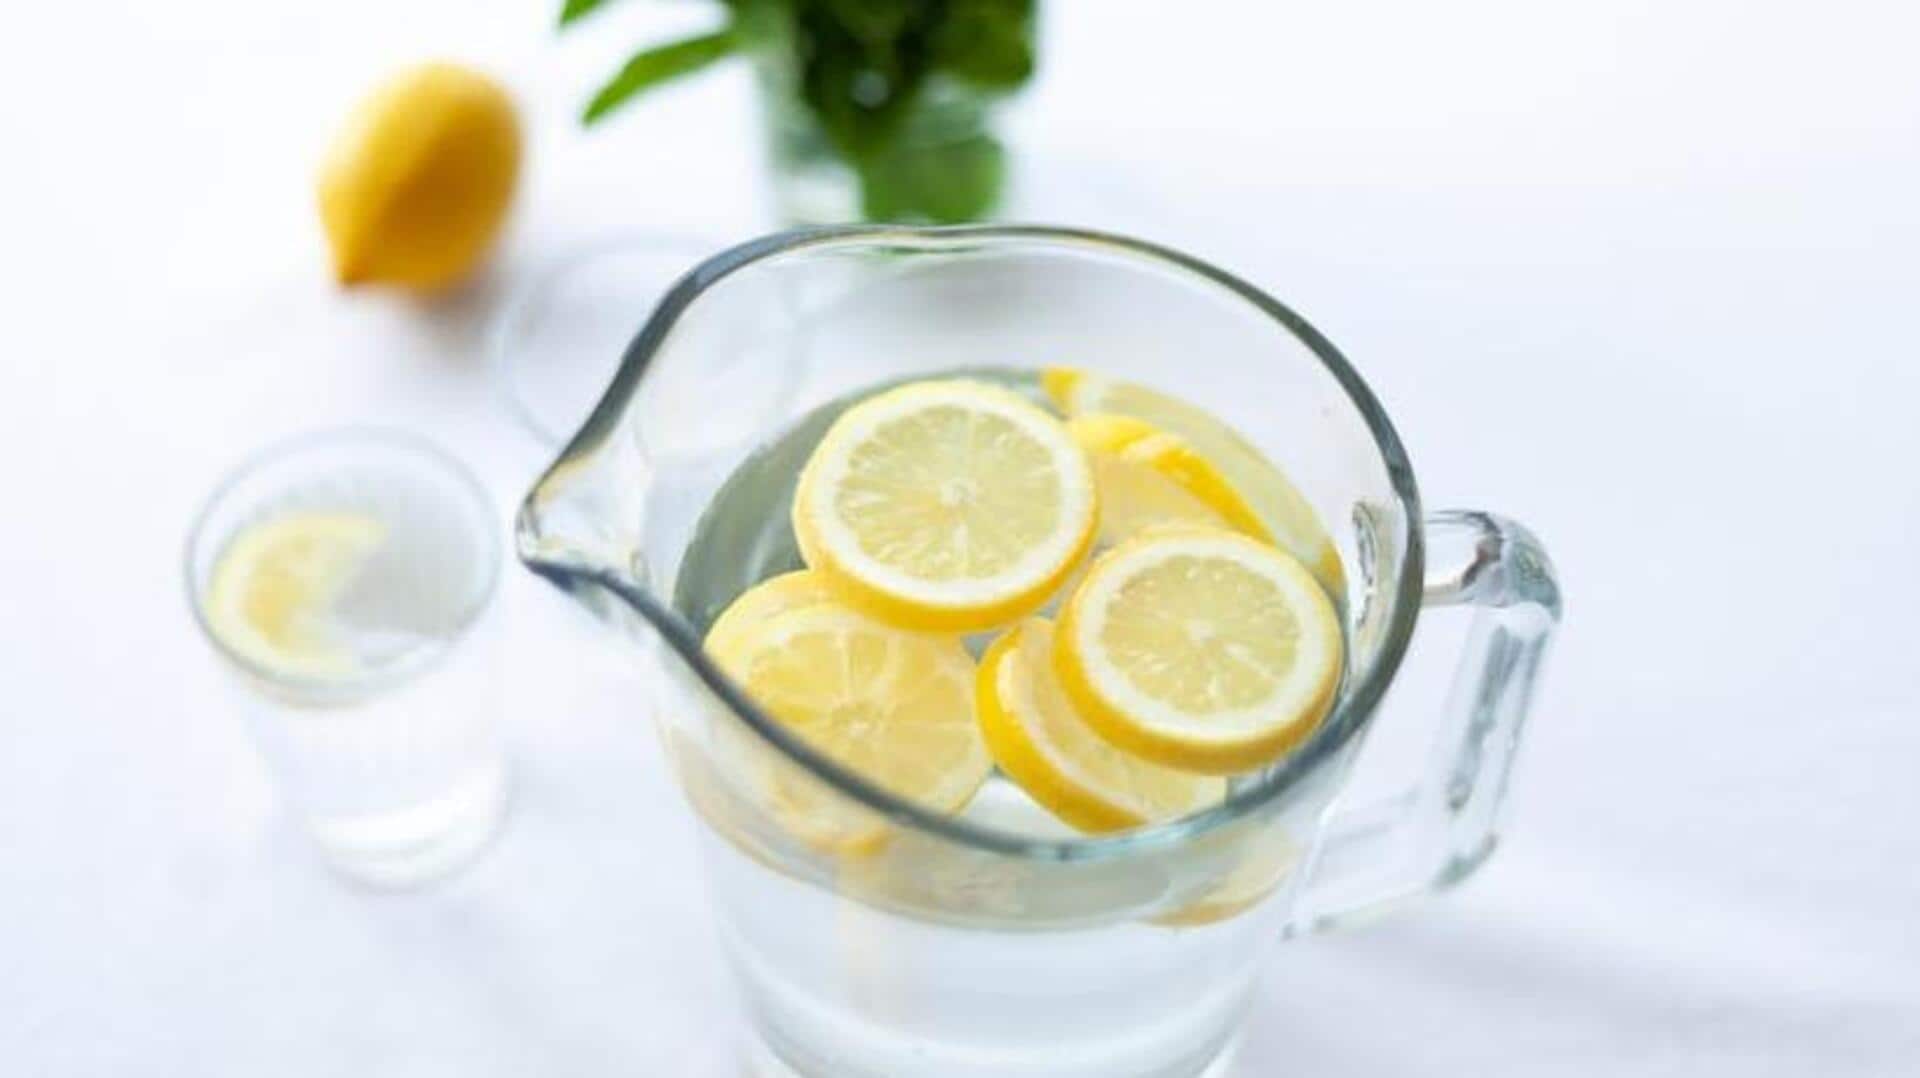 Beat the heat with these lemon-infused detox offerings